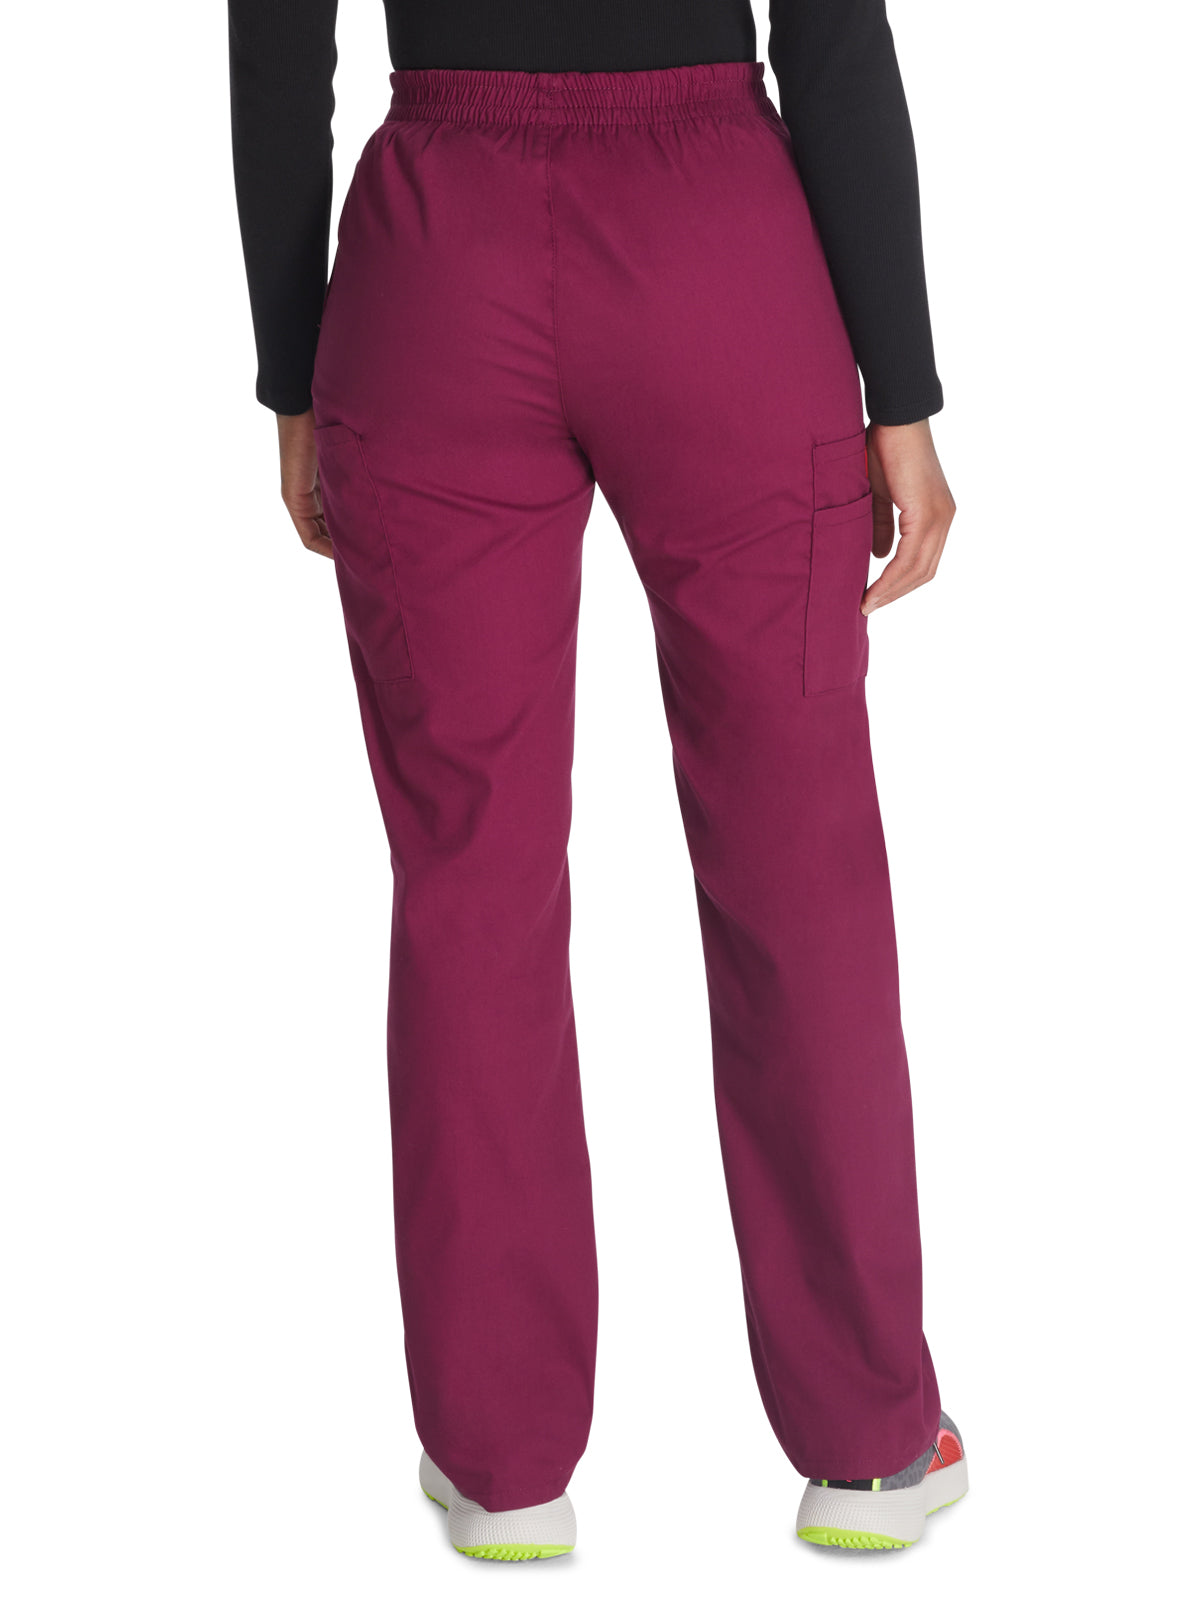 Women's Natural Rise Tapered Leg Pull-On Pant - 86106 - Wine